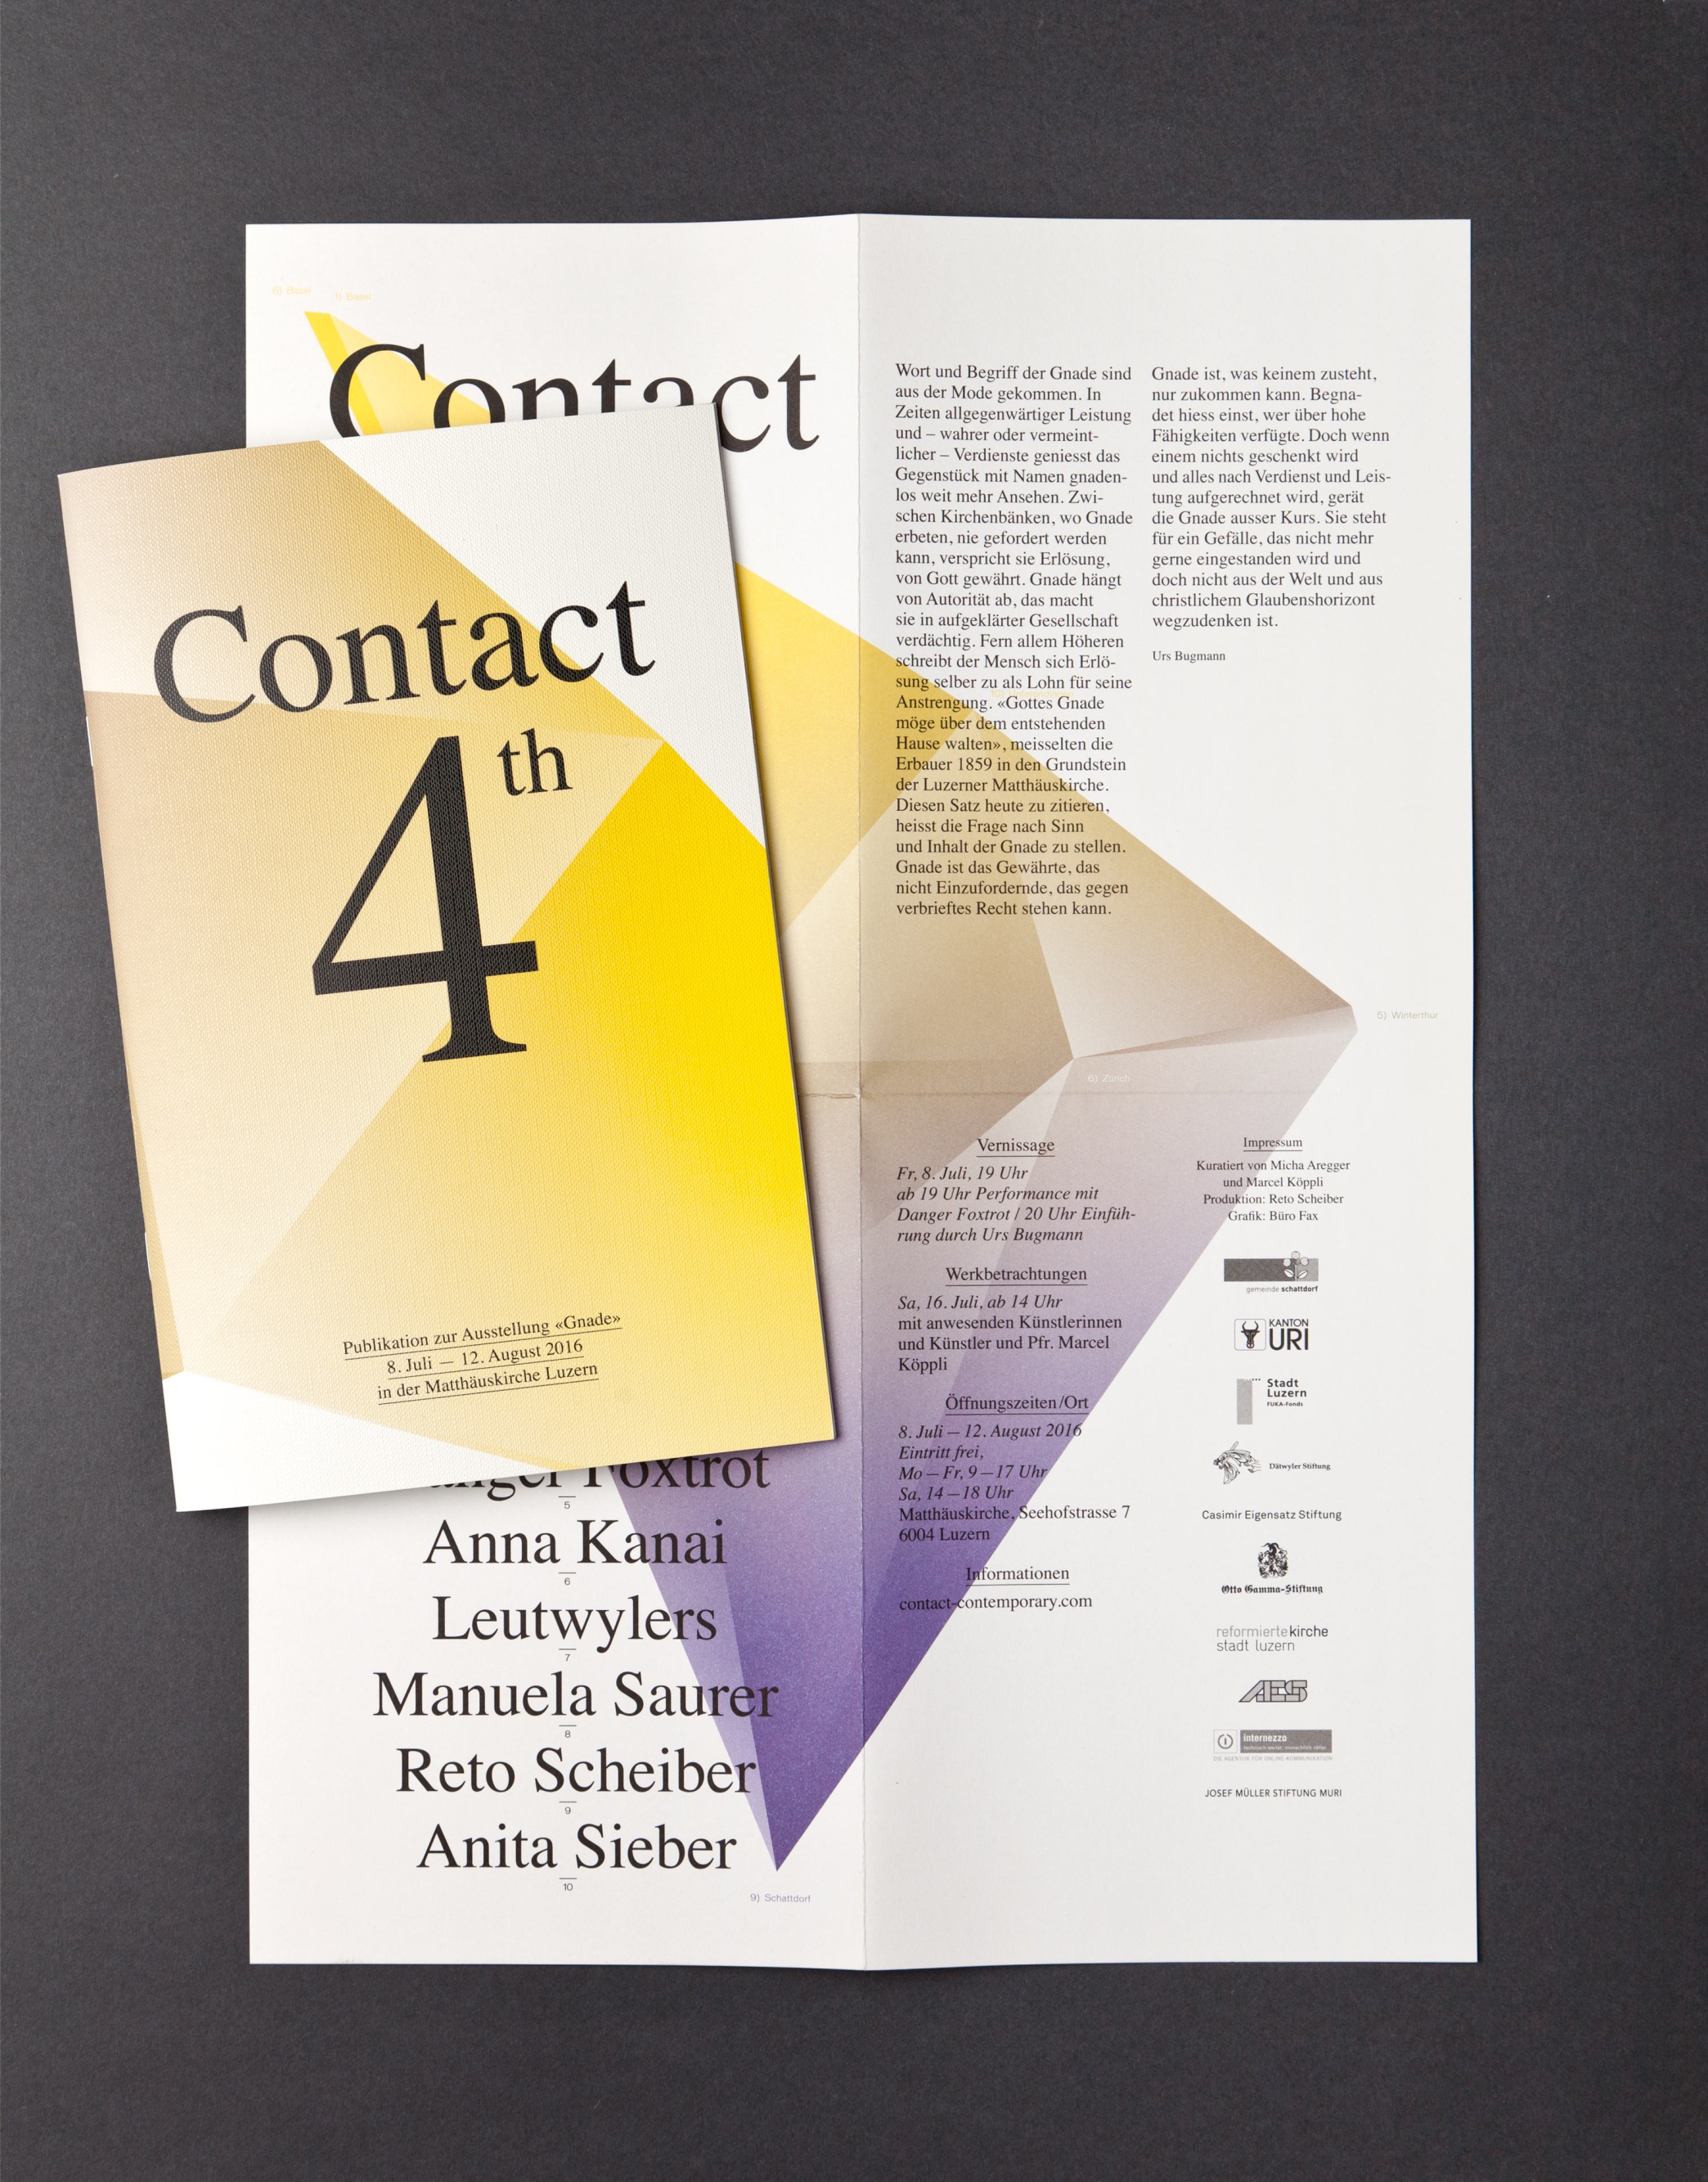 Contact 4th